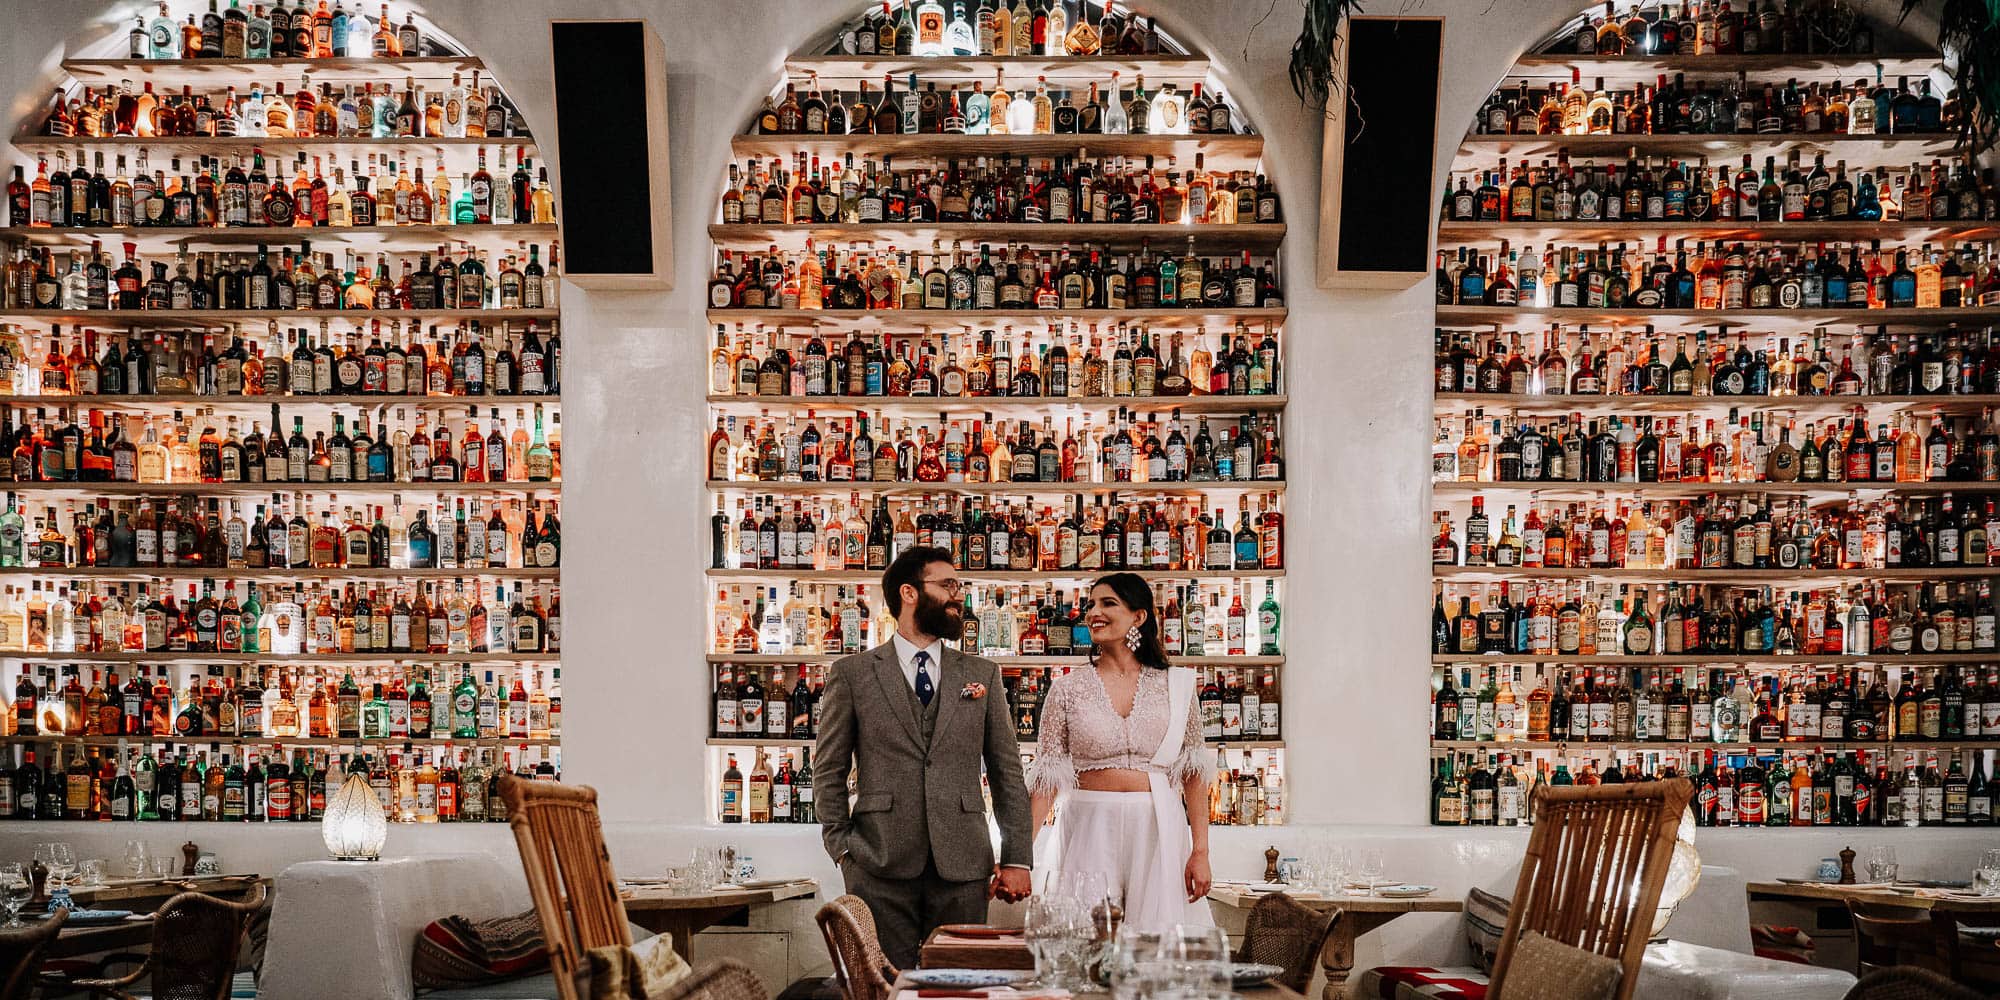 A Couple stands in front of lots of bottle of alcohol in a restaurant, Holding hands